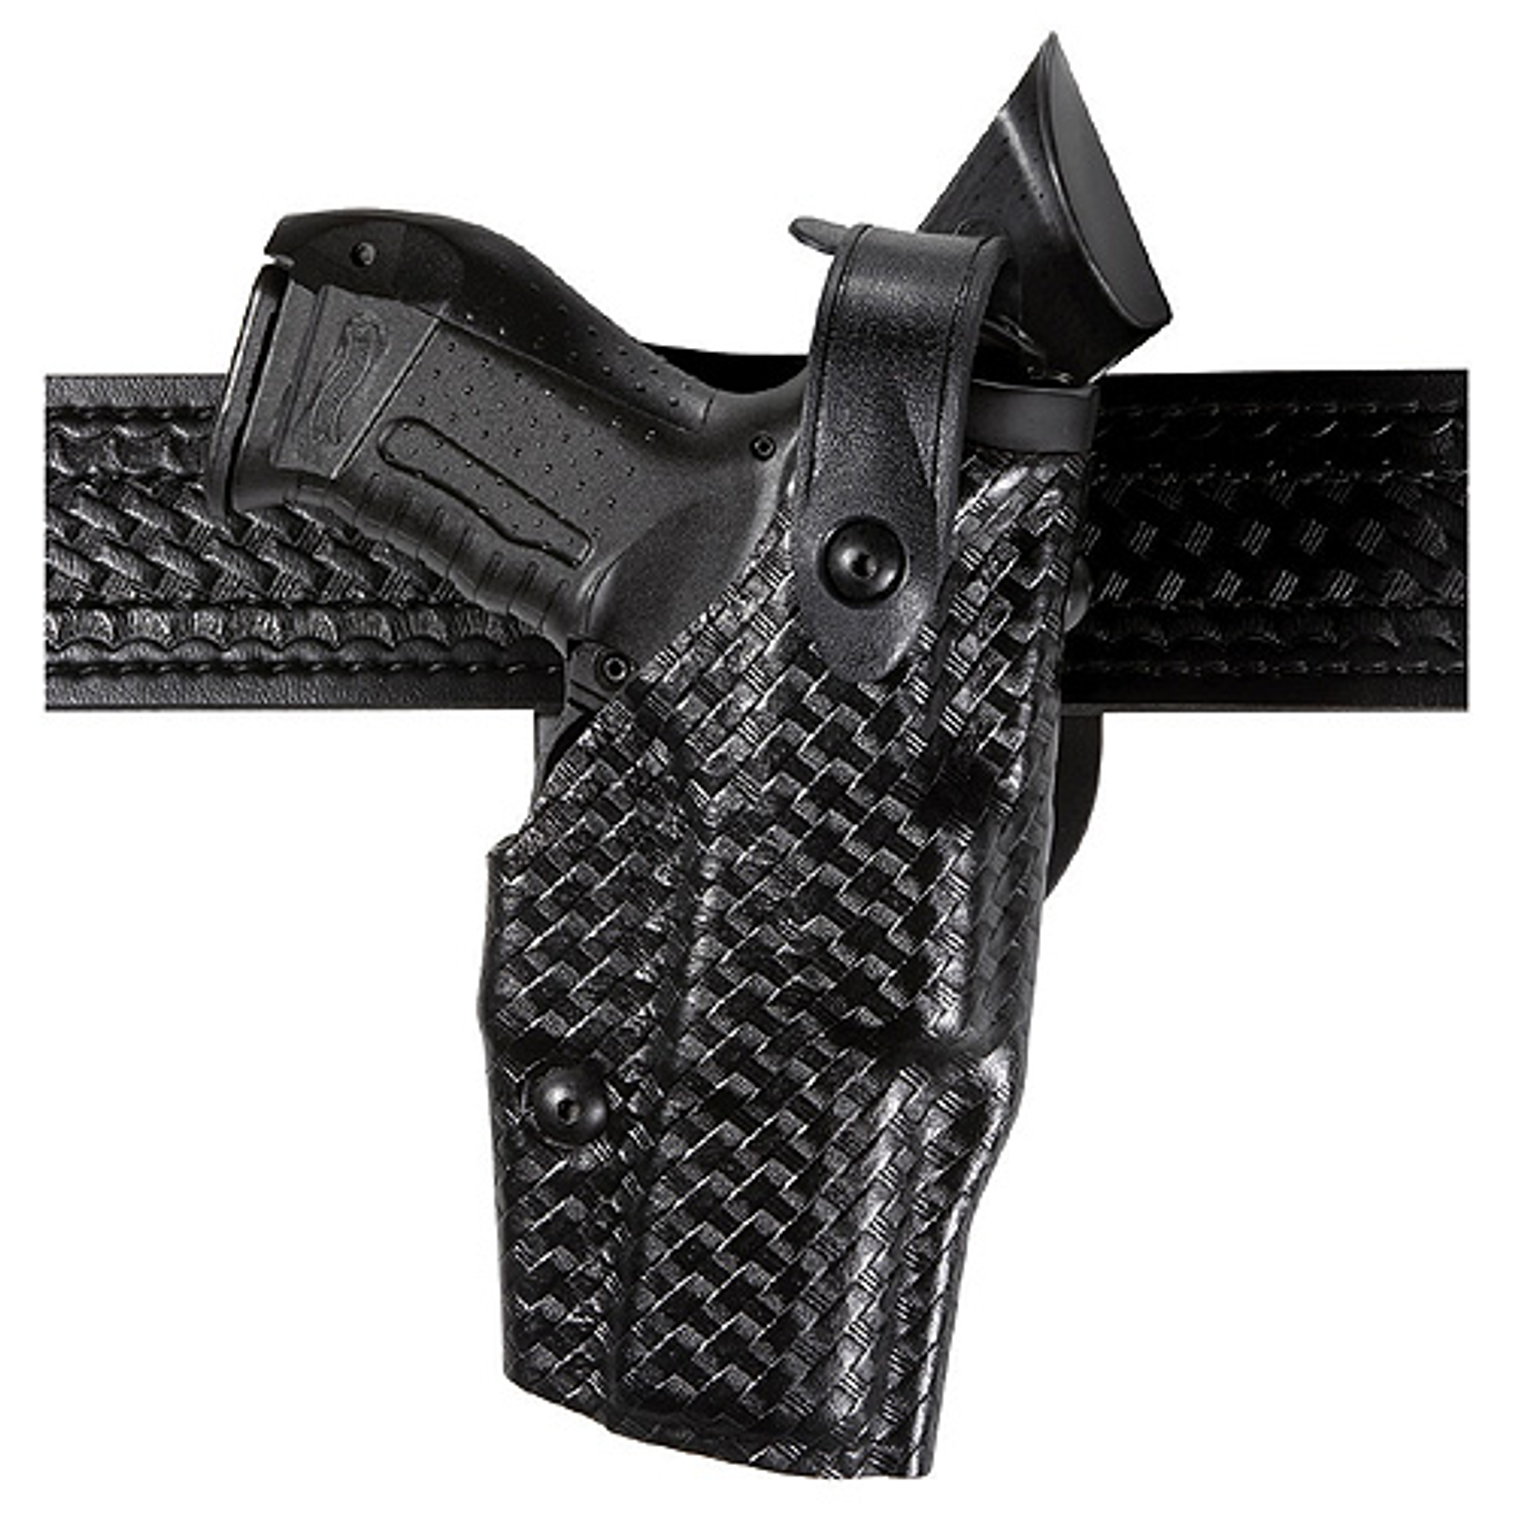 Model 6360 Als/sls Mid-ride, Level Iii Retention Duty Holster For Smith & Wesson M&p 9 W/ Light - KR6360-2192-81